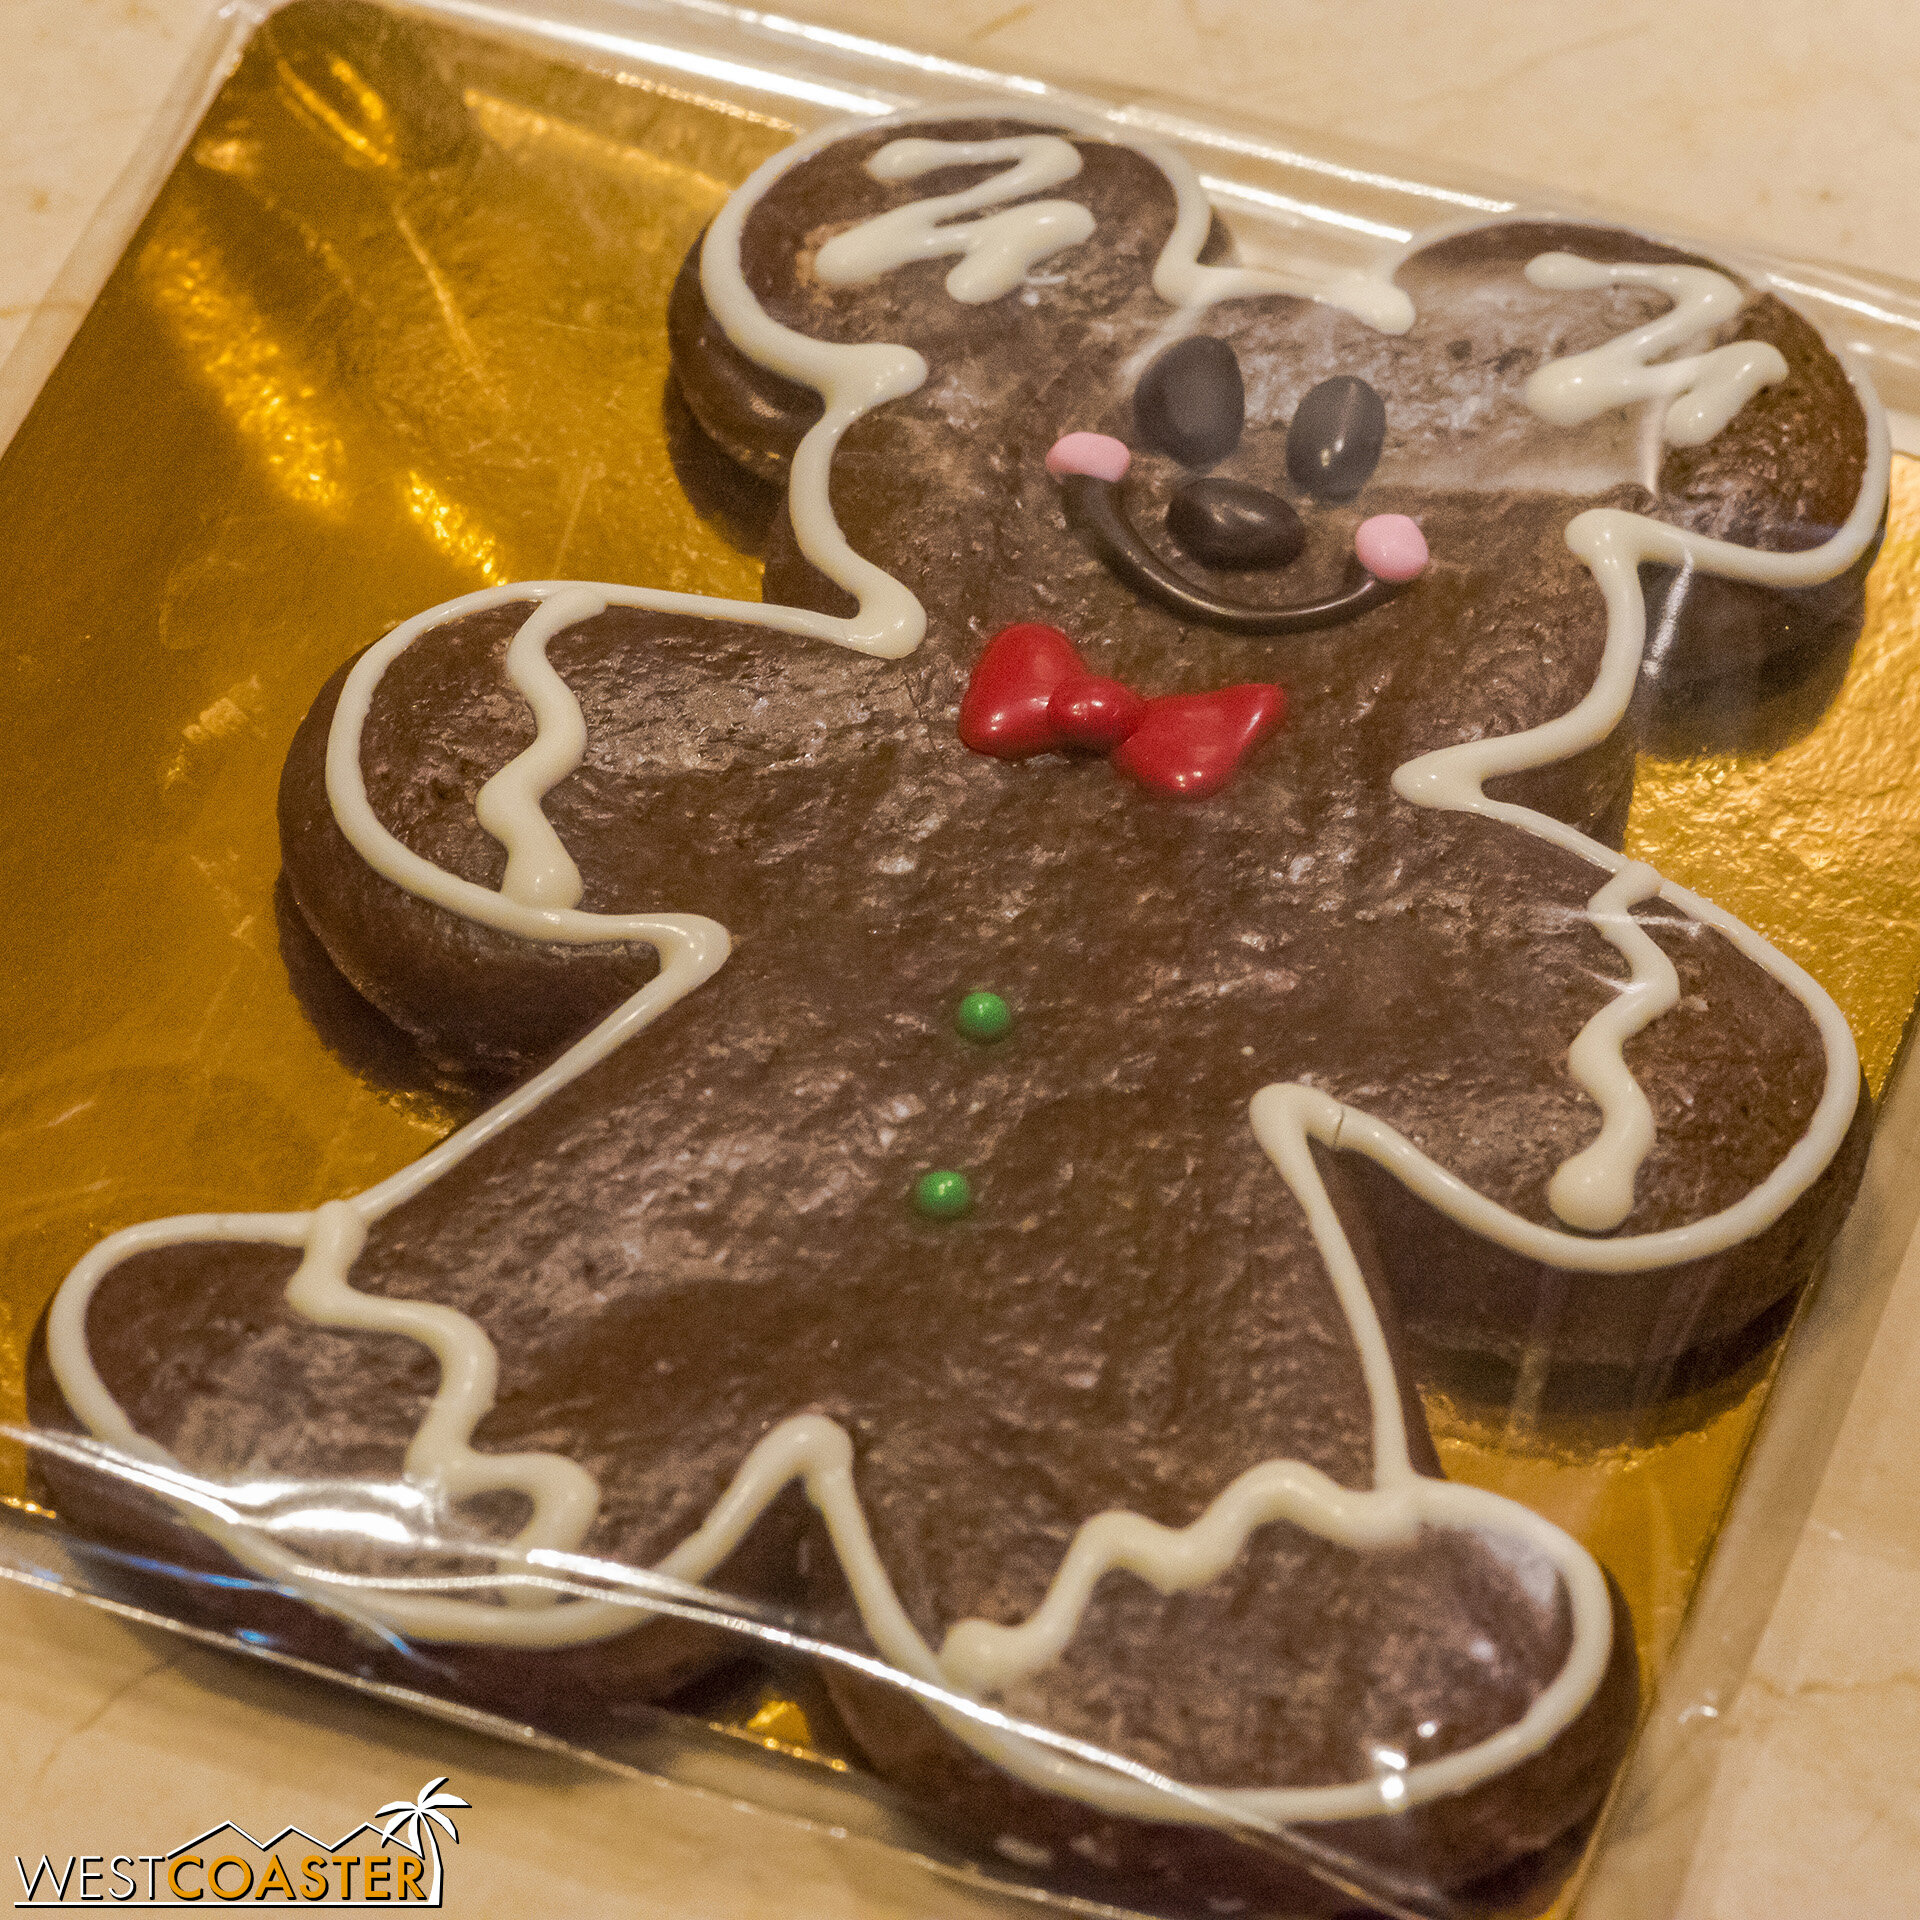  The Mickey Gingerbread Man is heavily spiced. 